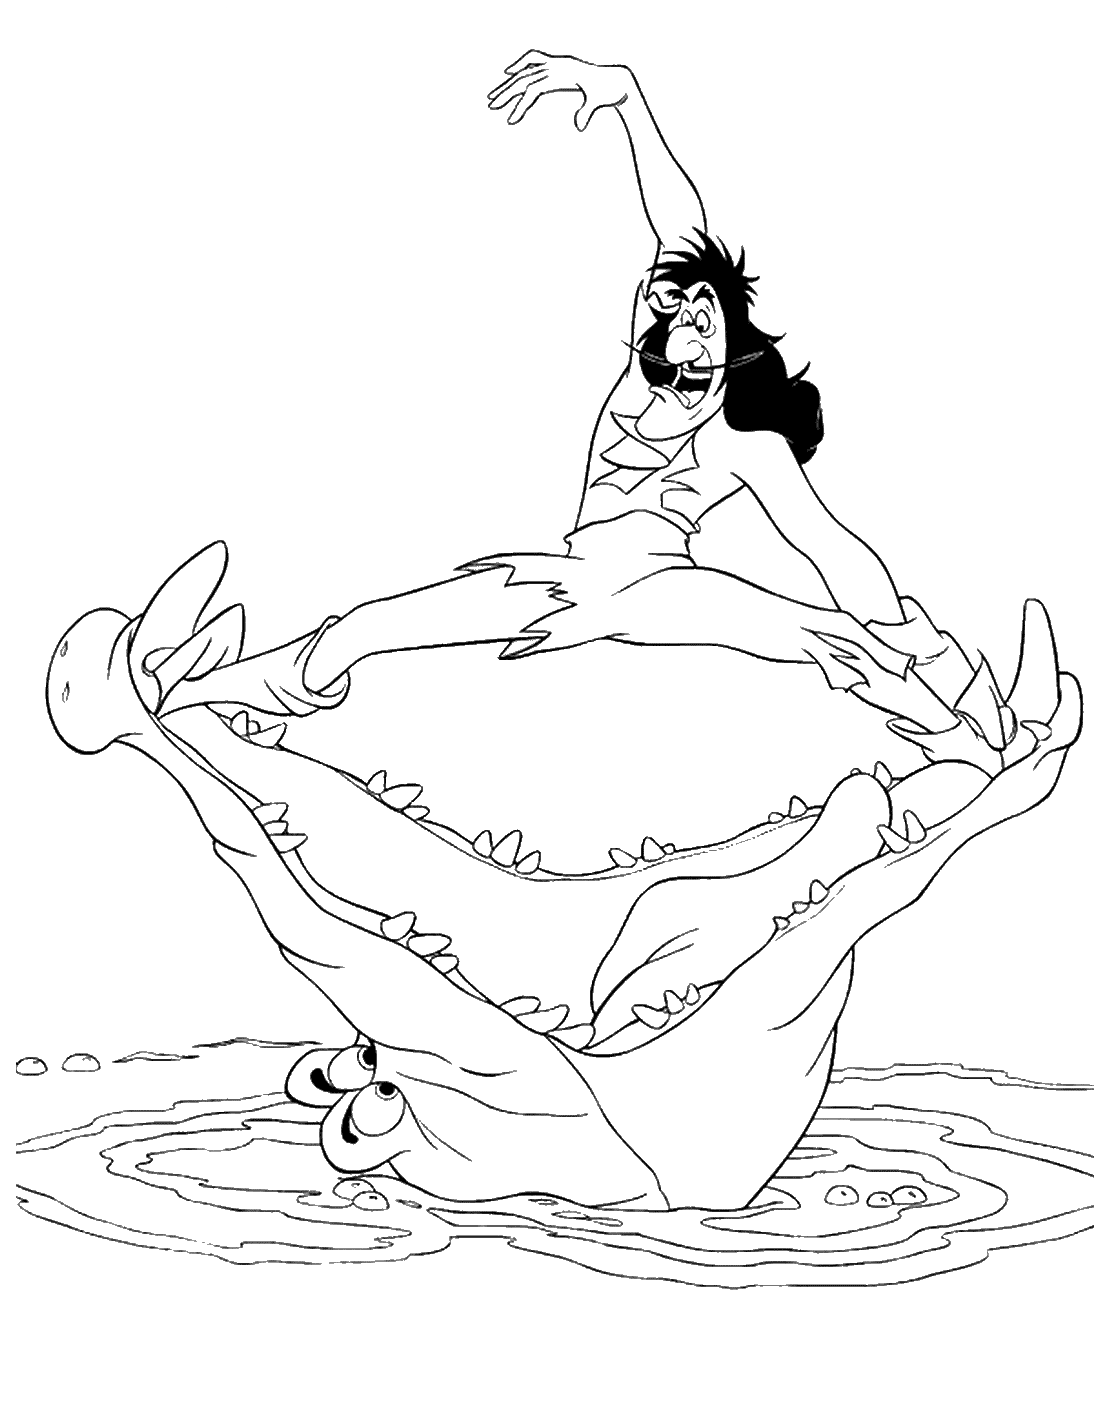 Coloring page - Captain Hook and the Crocodile